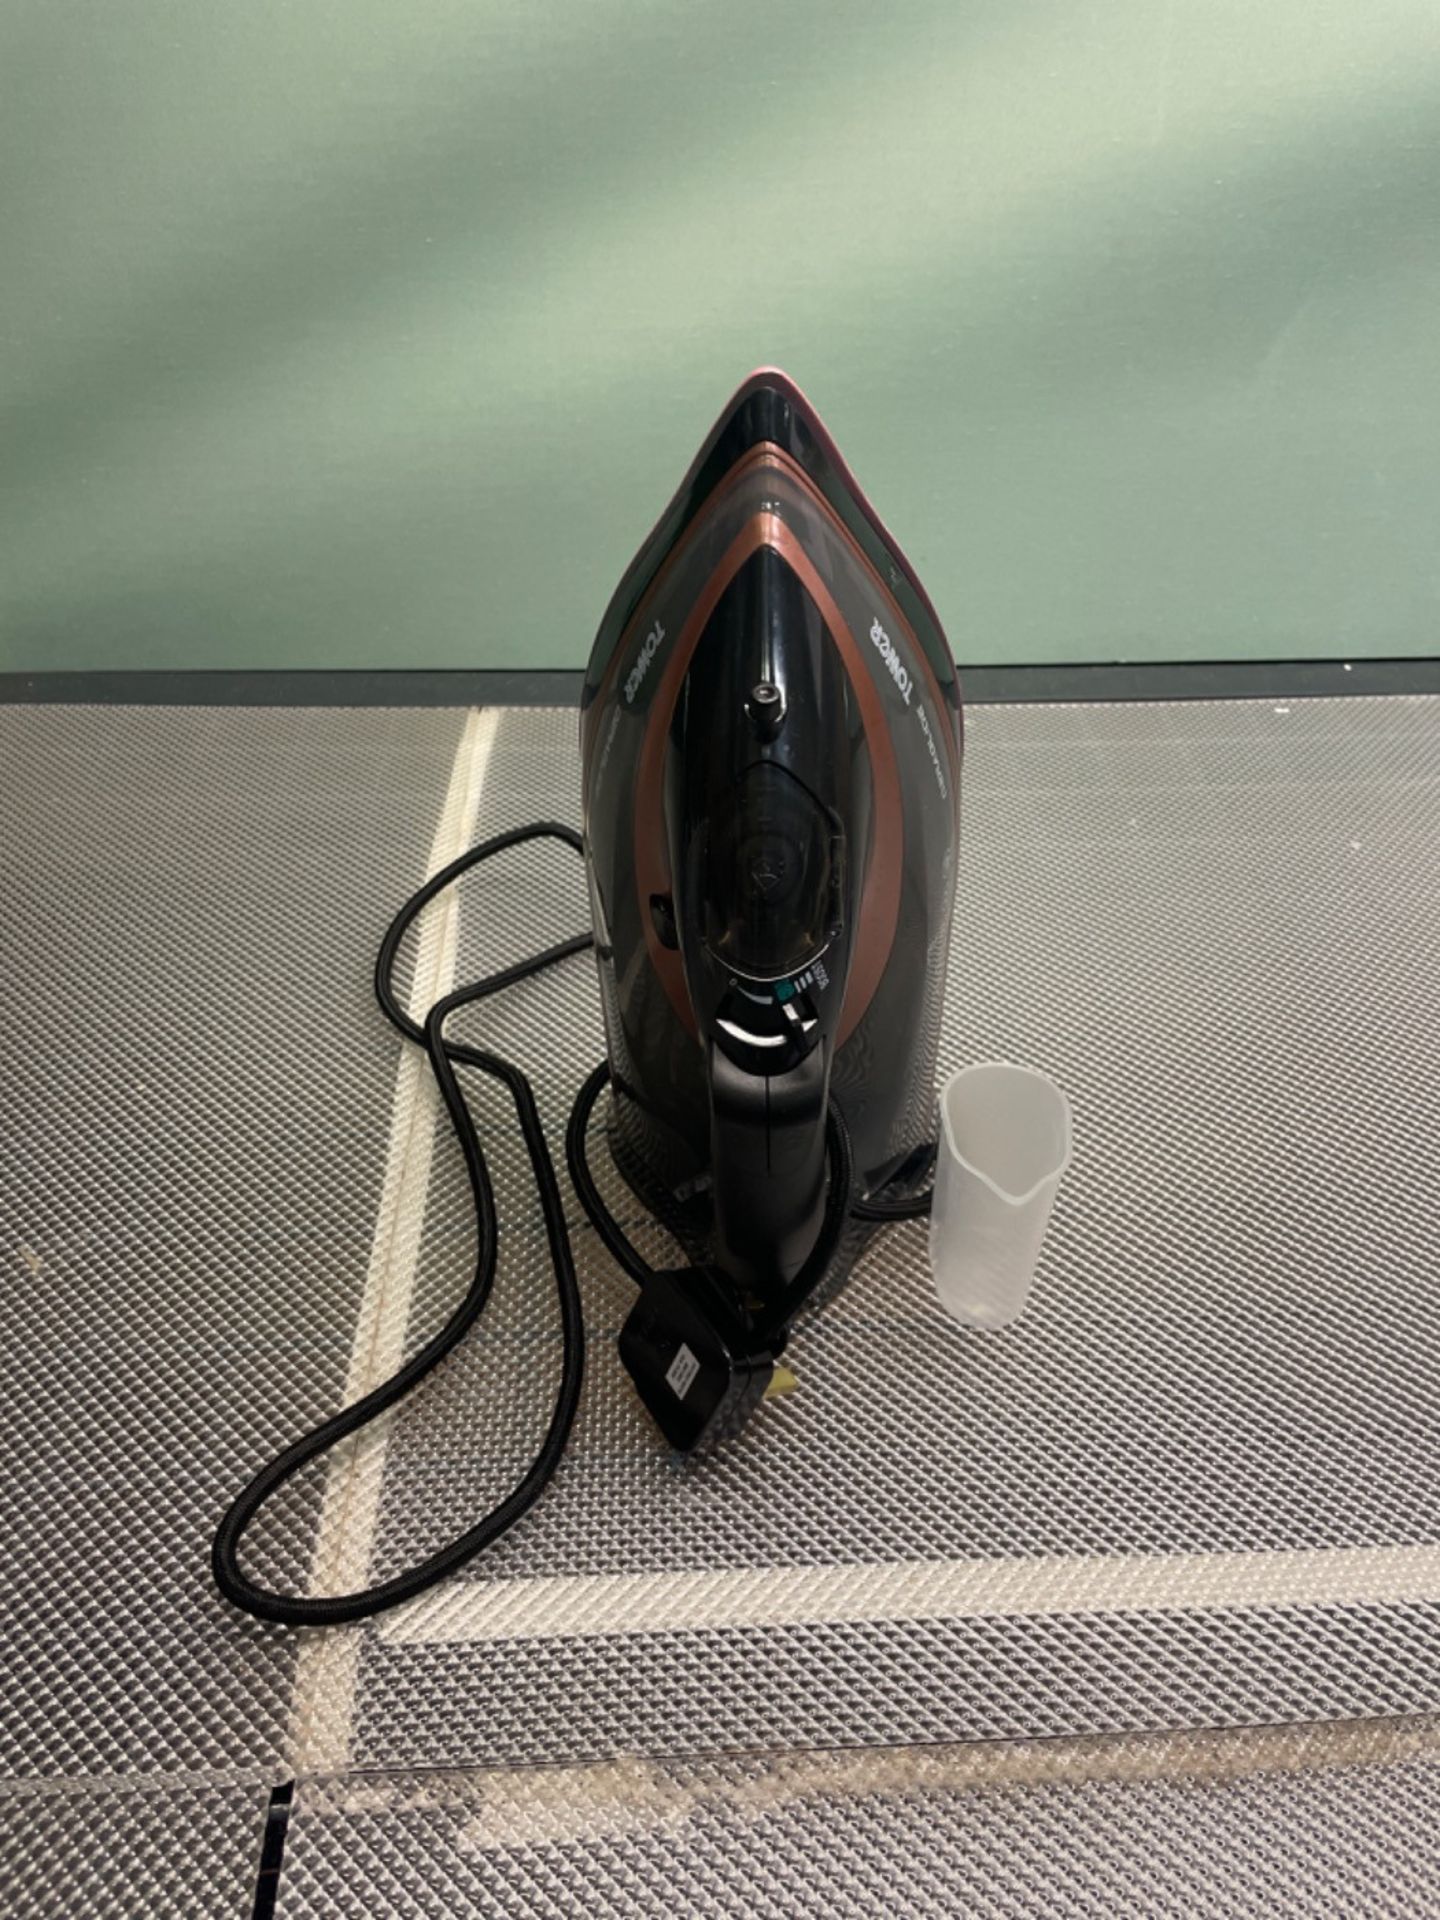 Tower T22013 CeraGlide Steam Iron, Ceramic Sole Plate, 3100 W, Rose Gold and Black. - Image 2 of 3